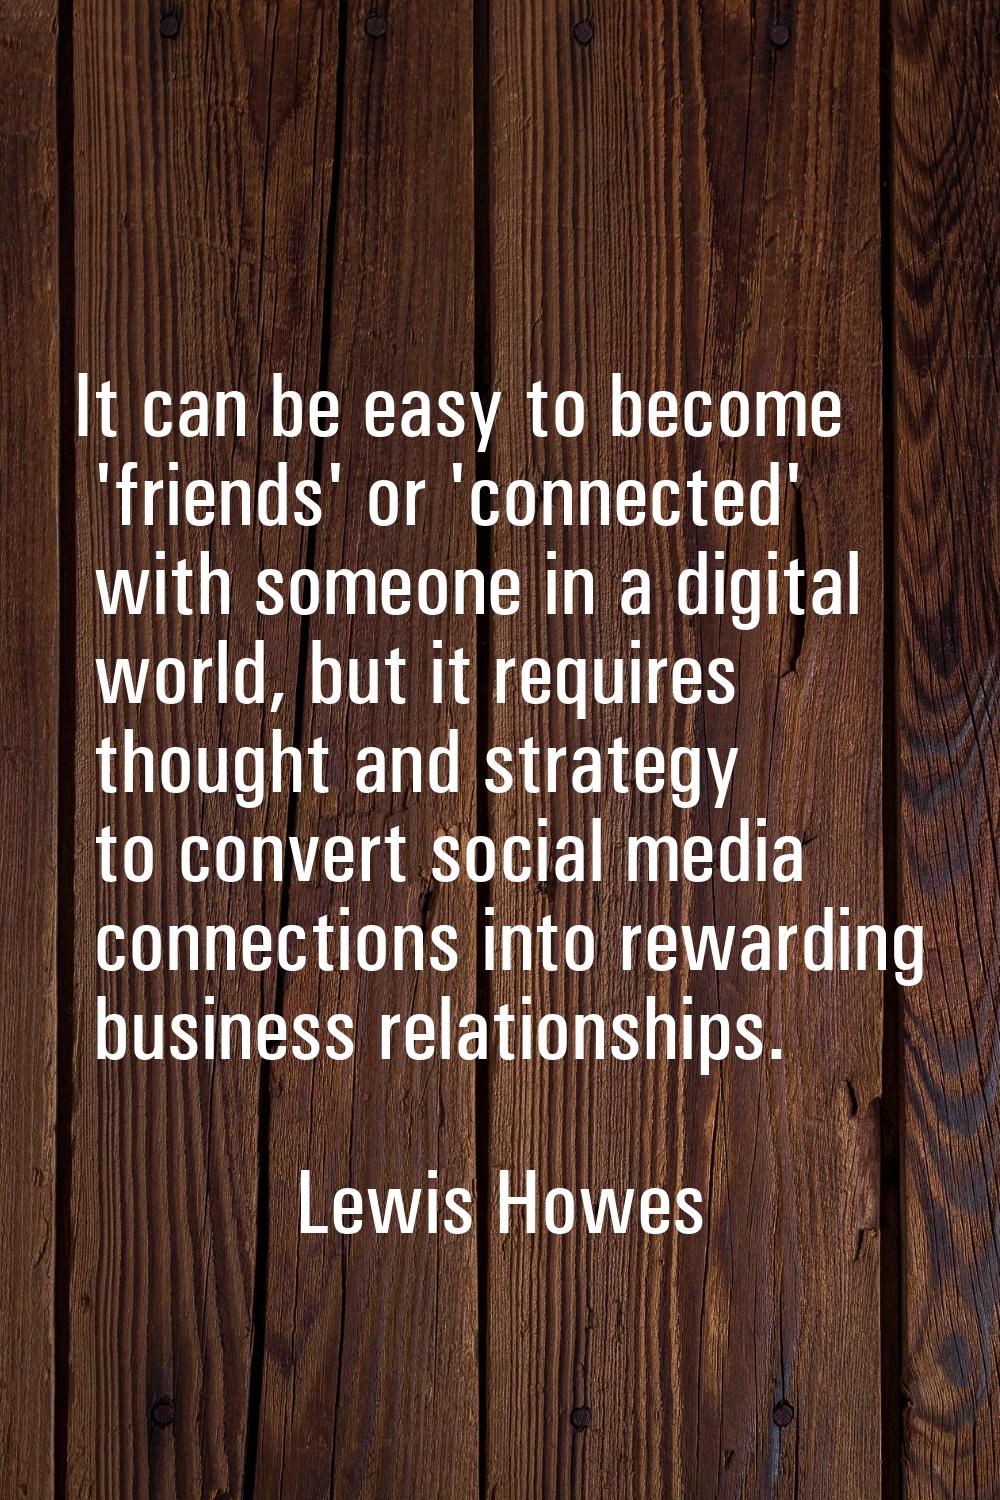 It can be easy to become 'friends' or 'connected' with someone in a digital world, but it requires 